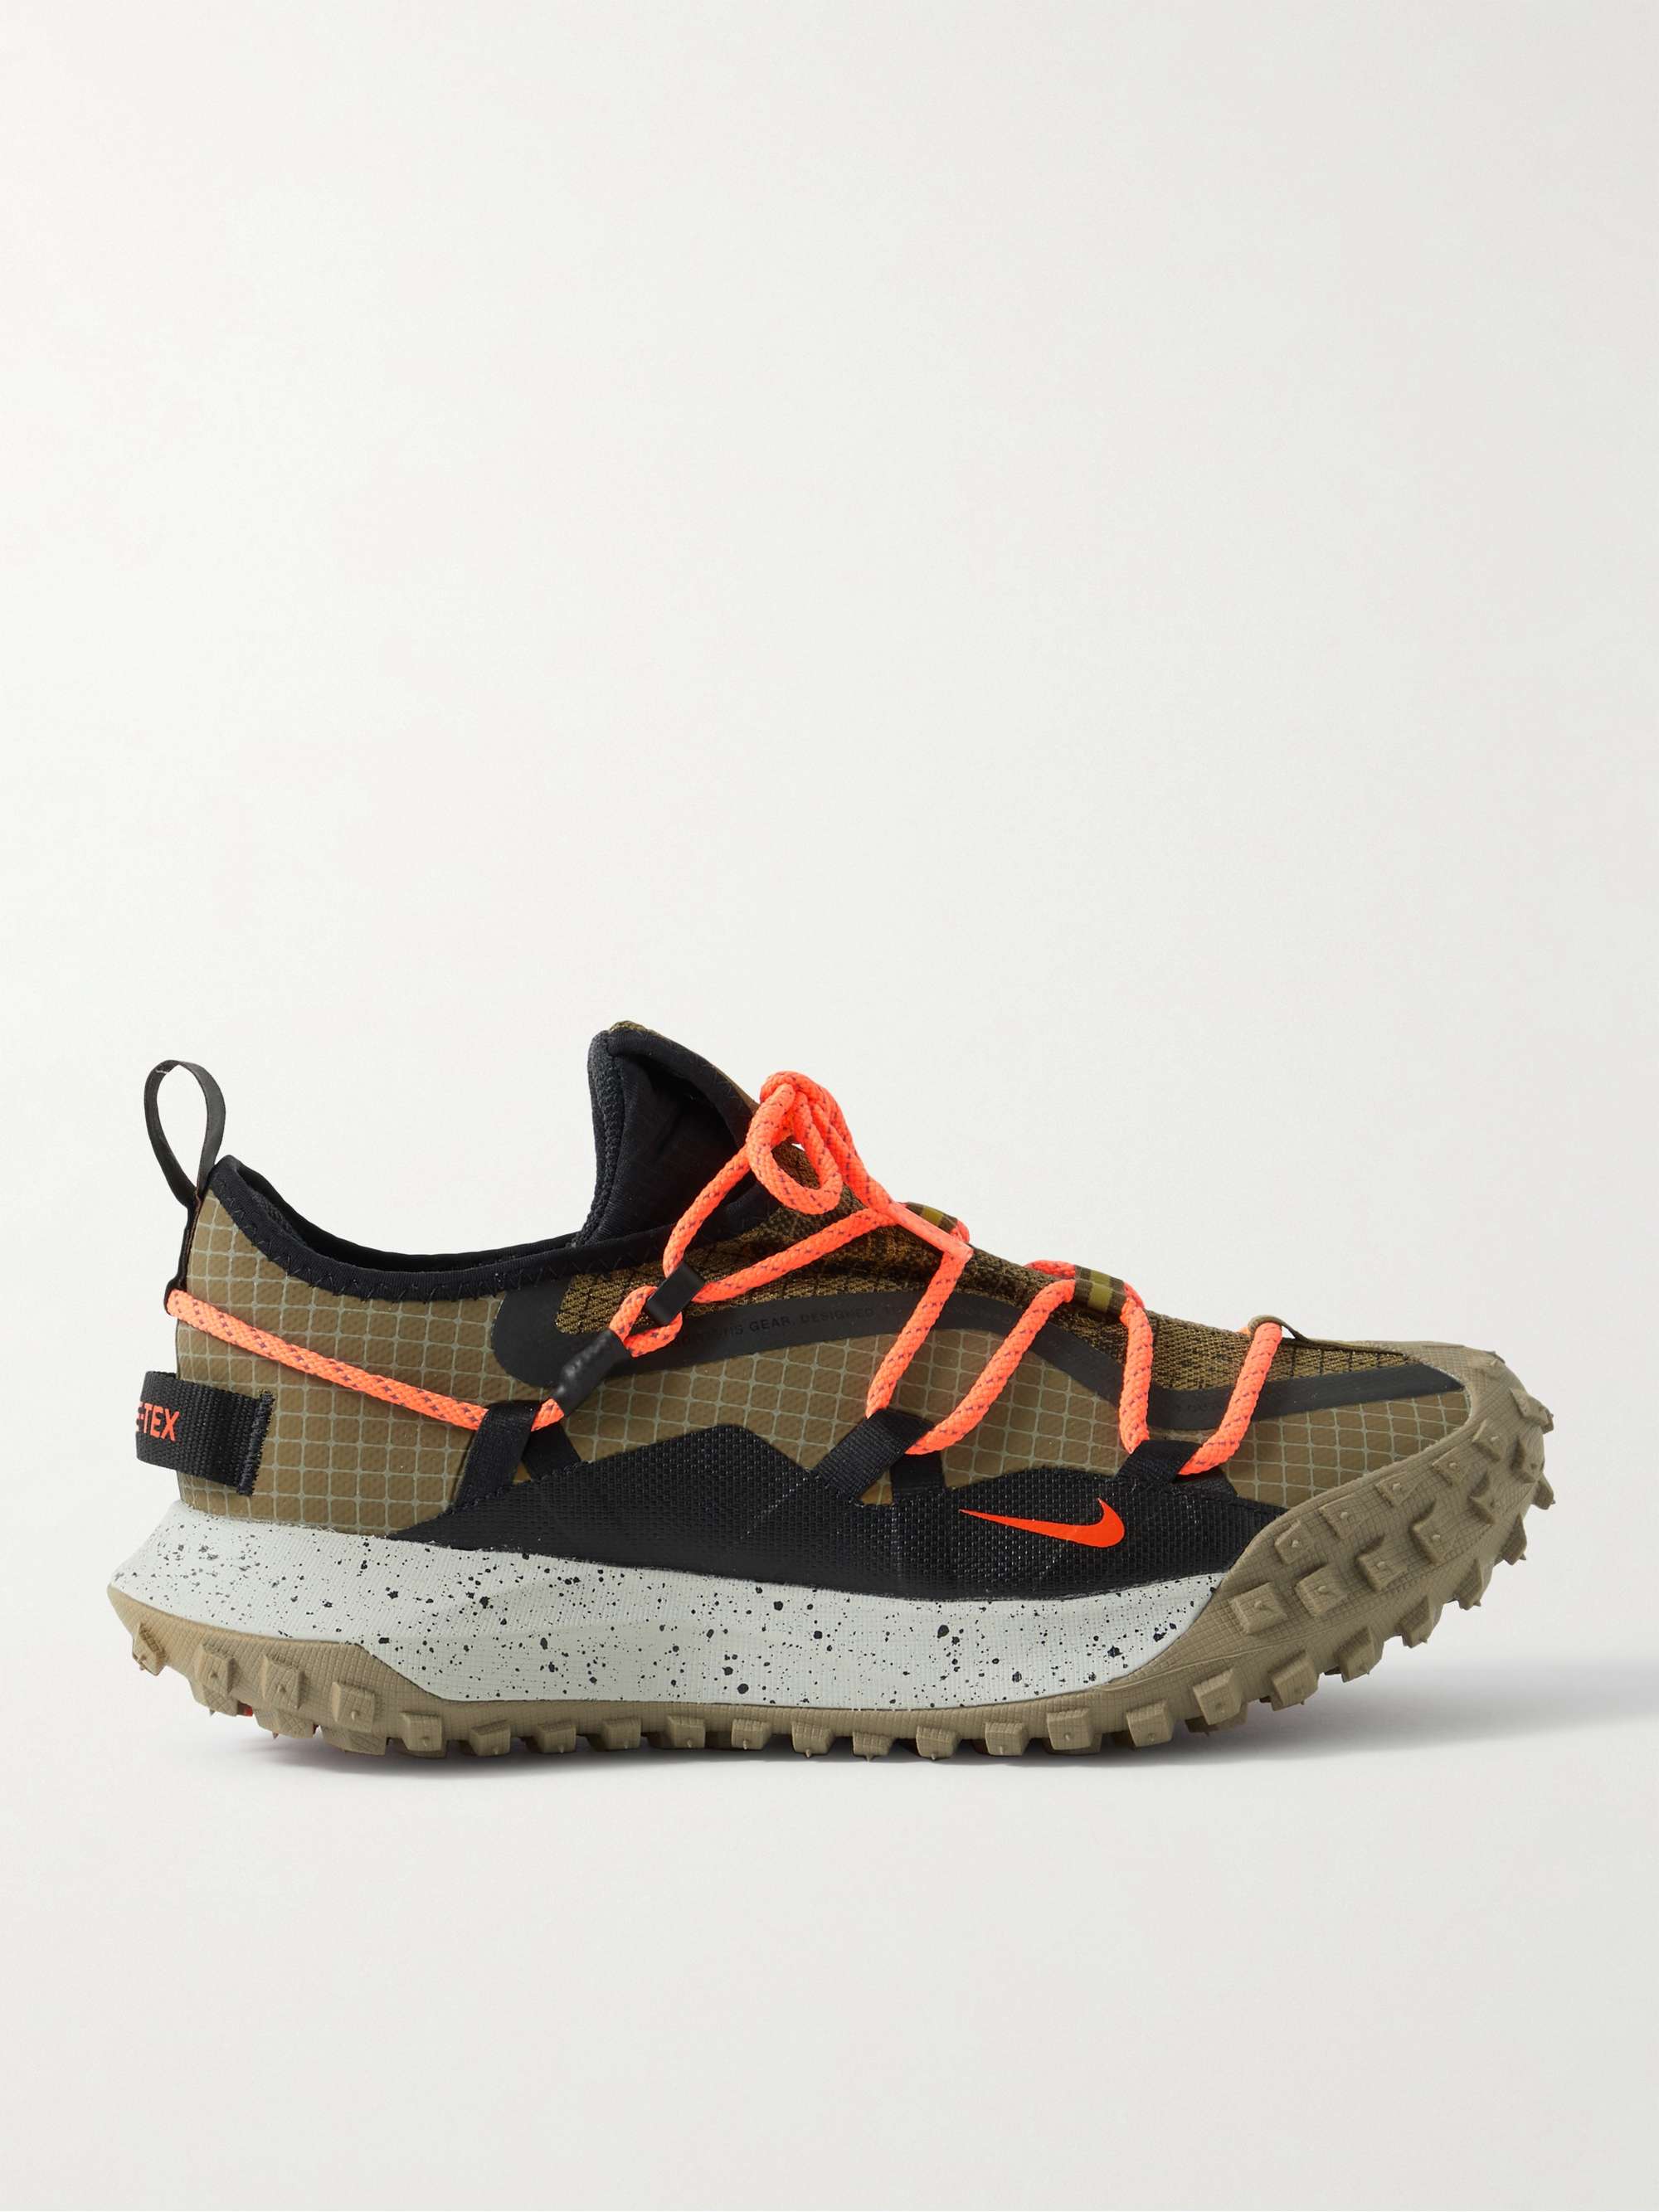 Annihilate lens smear Brown ACG Mountain Fly Rubber-Trimmed GORE-TEX Sneakers | NIKE | MR PORTER